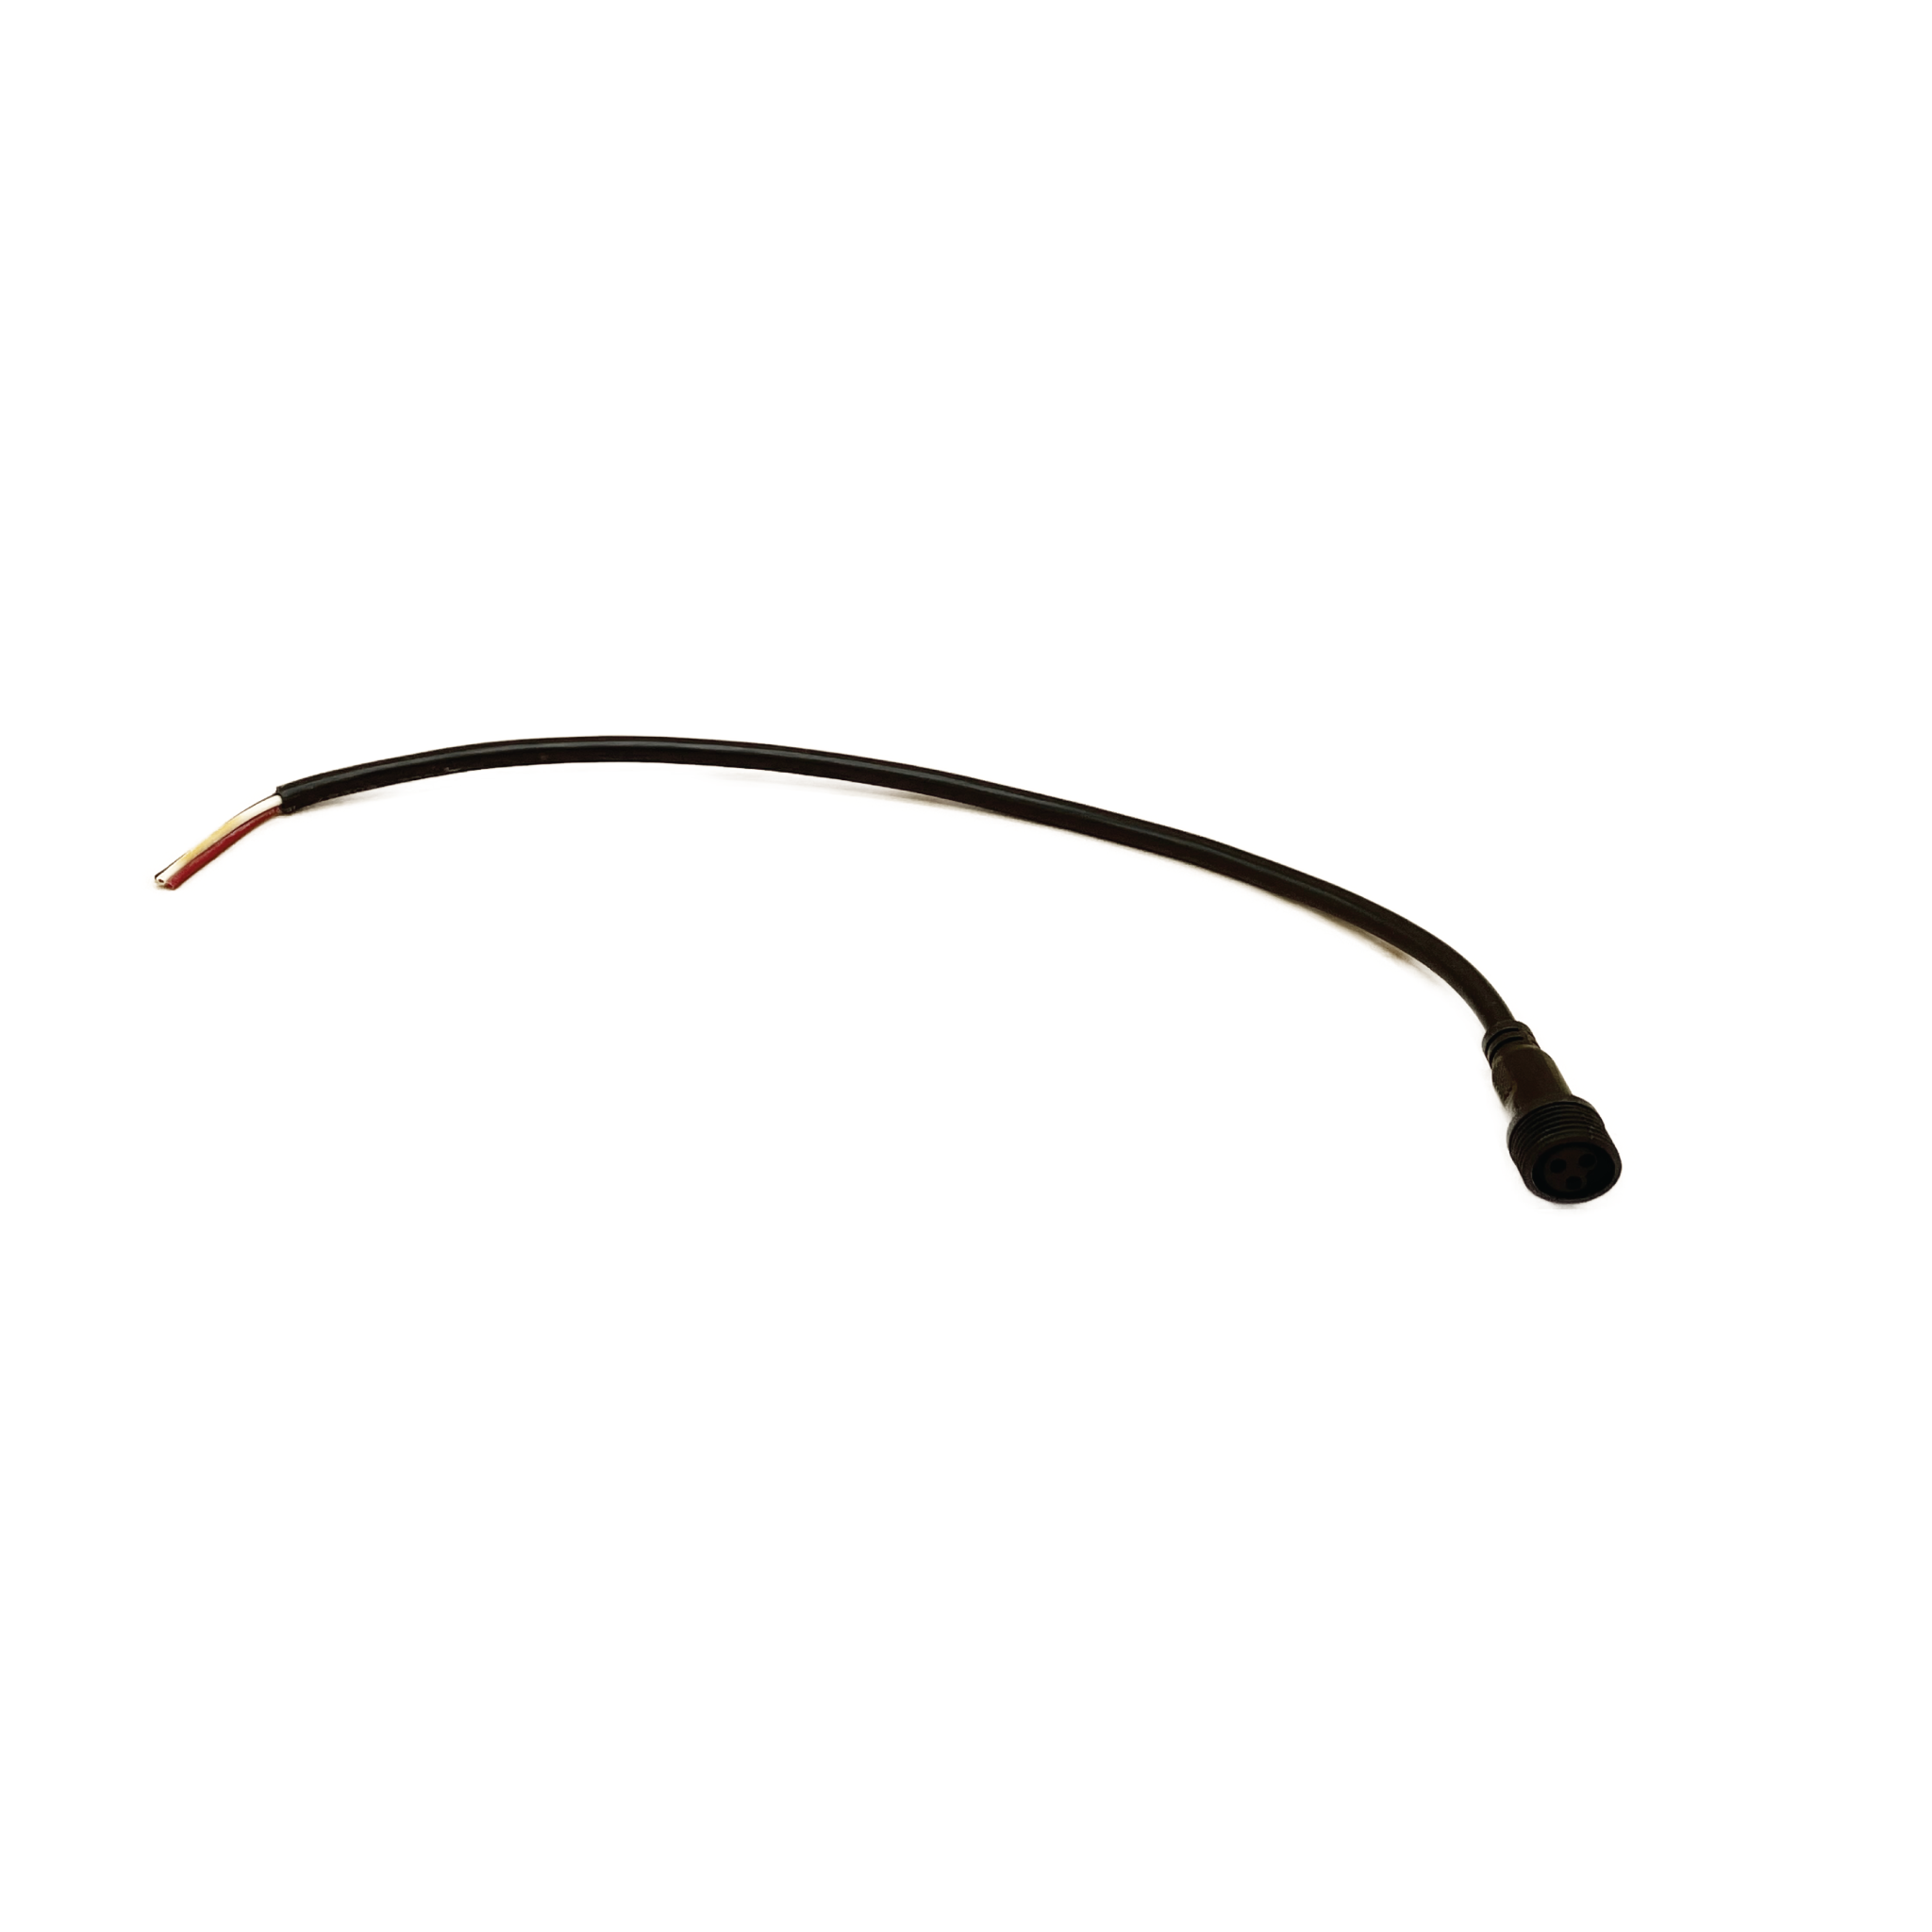 16" Pigtail-3 Core RayWu Female End